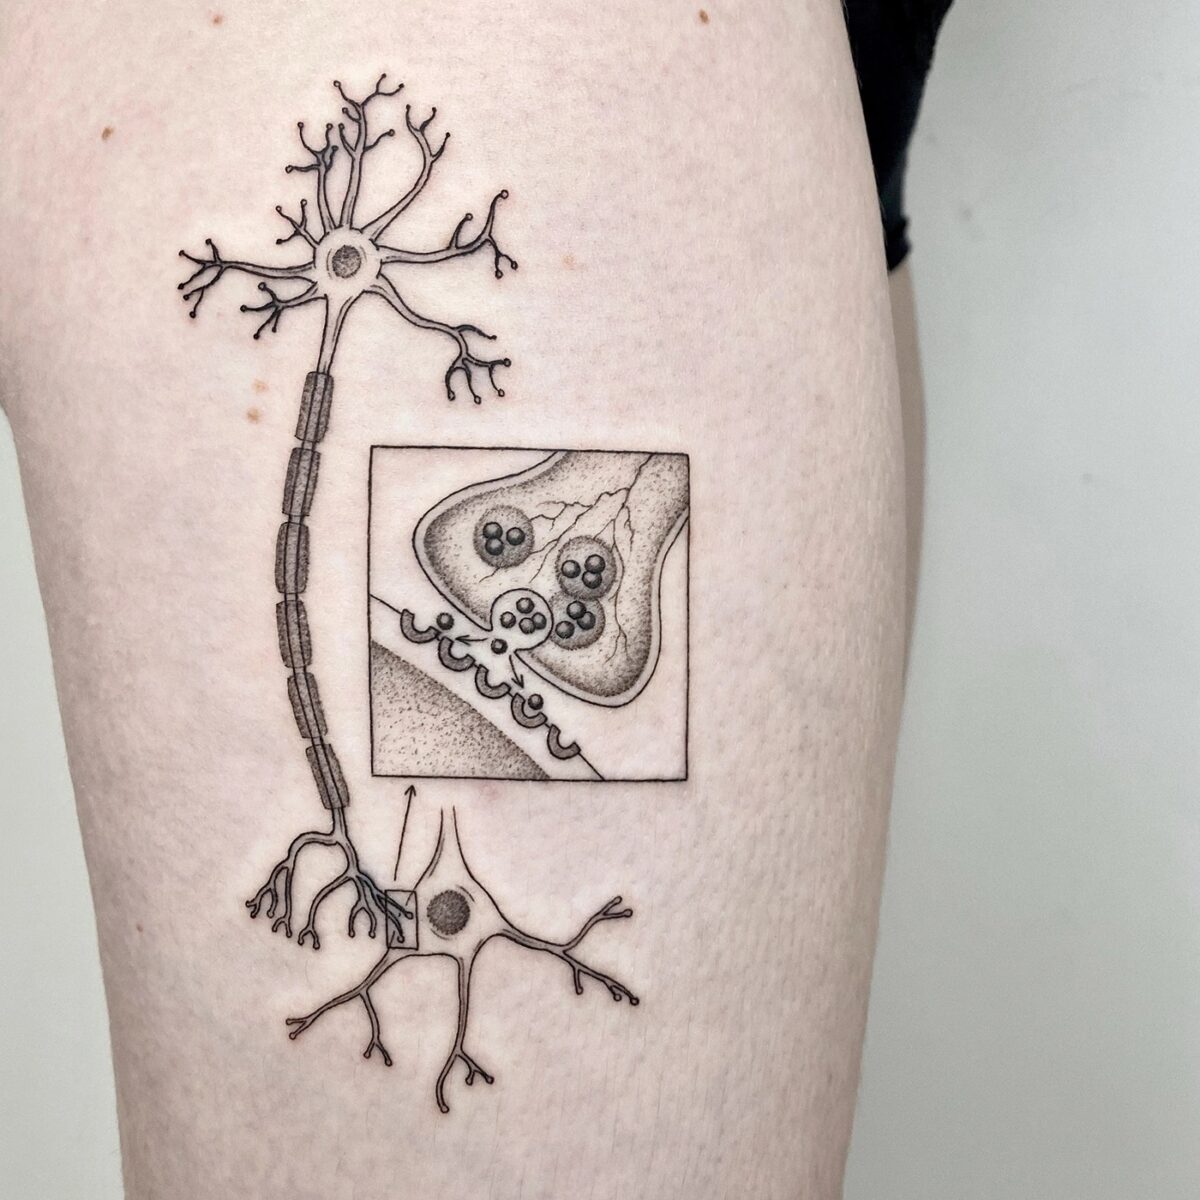 Whimsical Vintage Science Book Inspired Tattoos By Michele Volpi 20